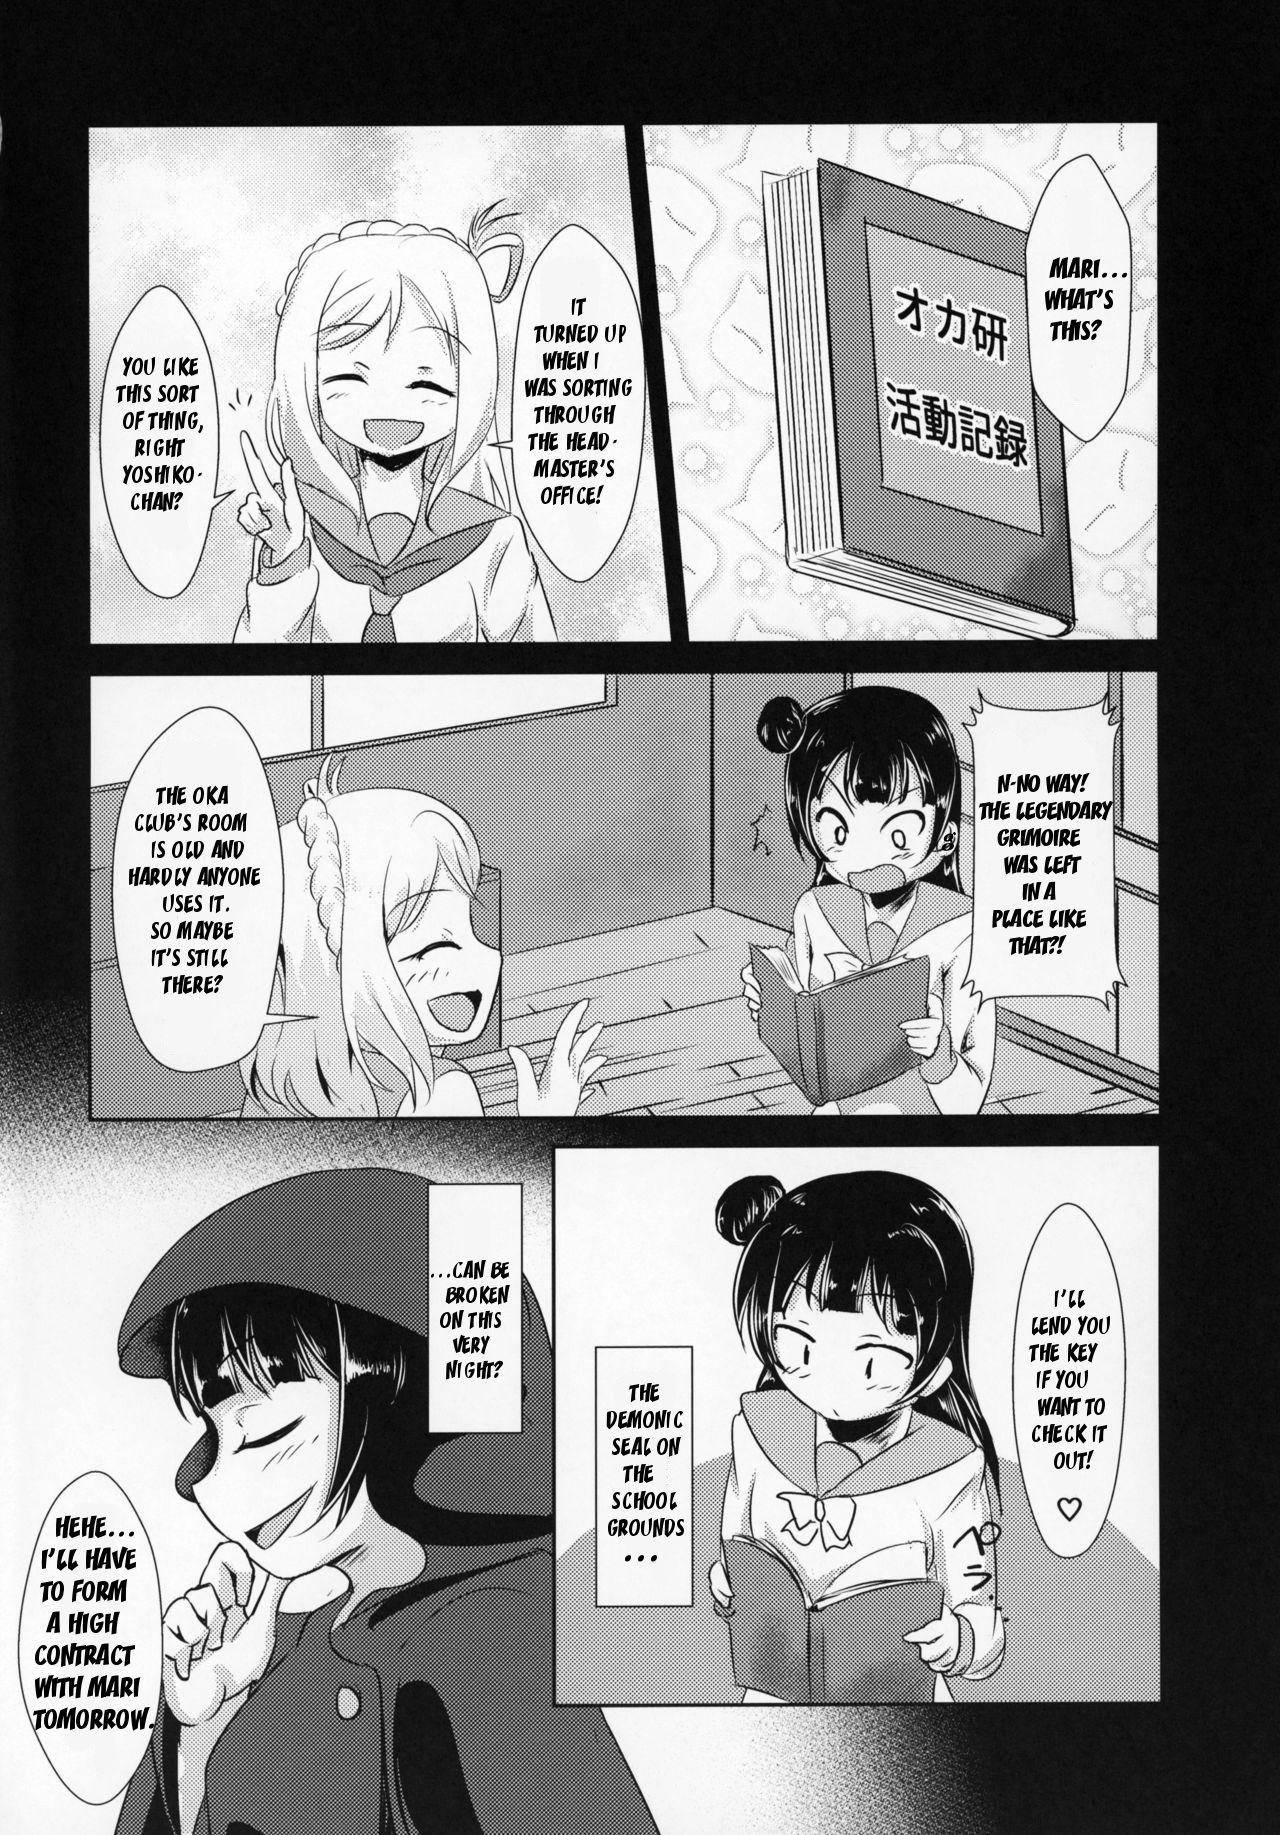 Long Fallen Night Fever - Love live sunshine Curious - Page 3